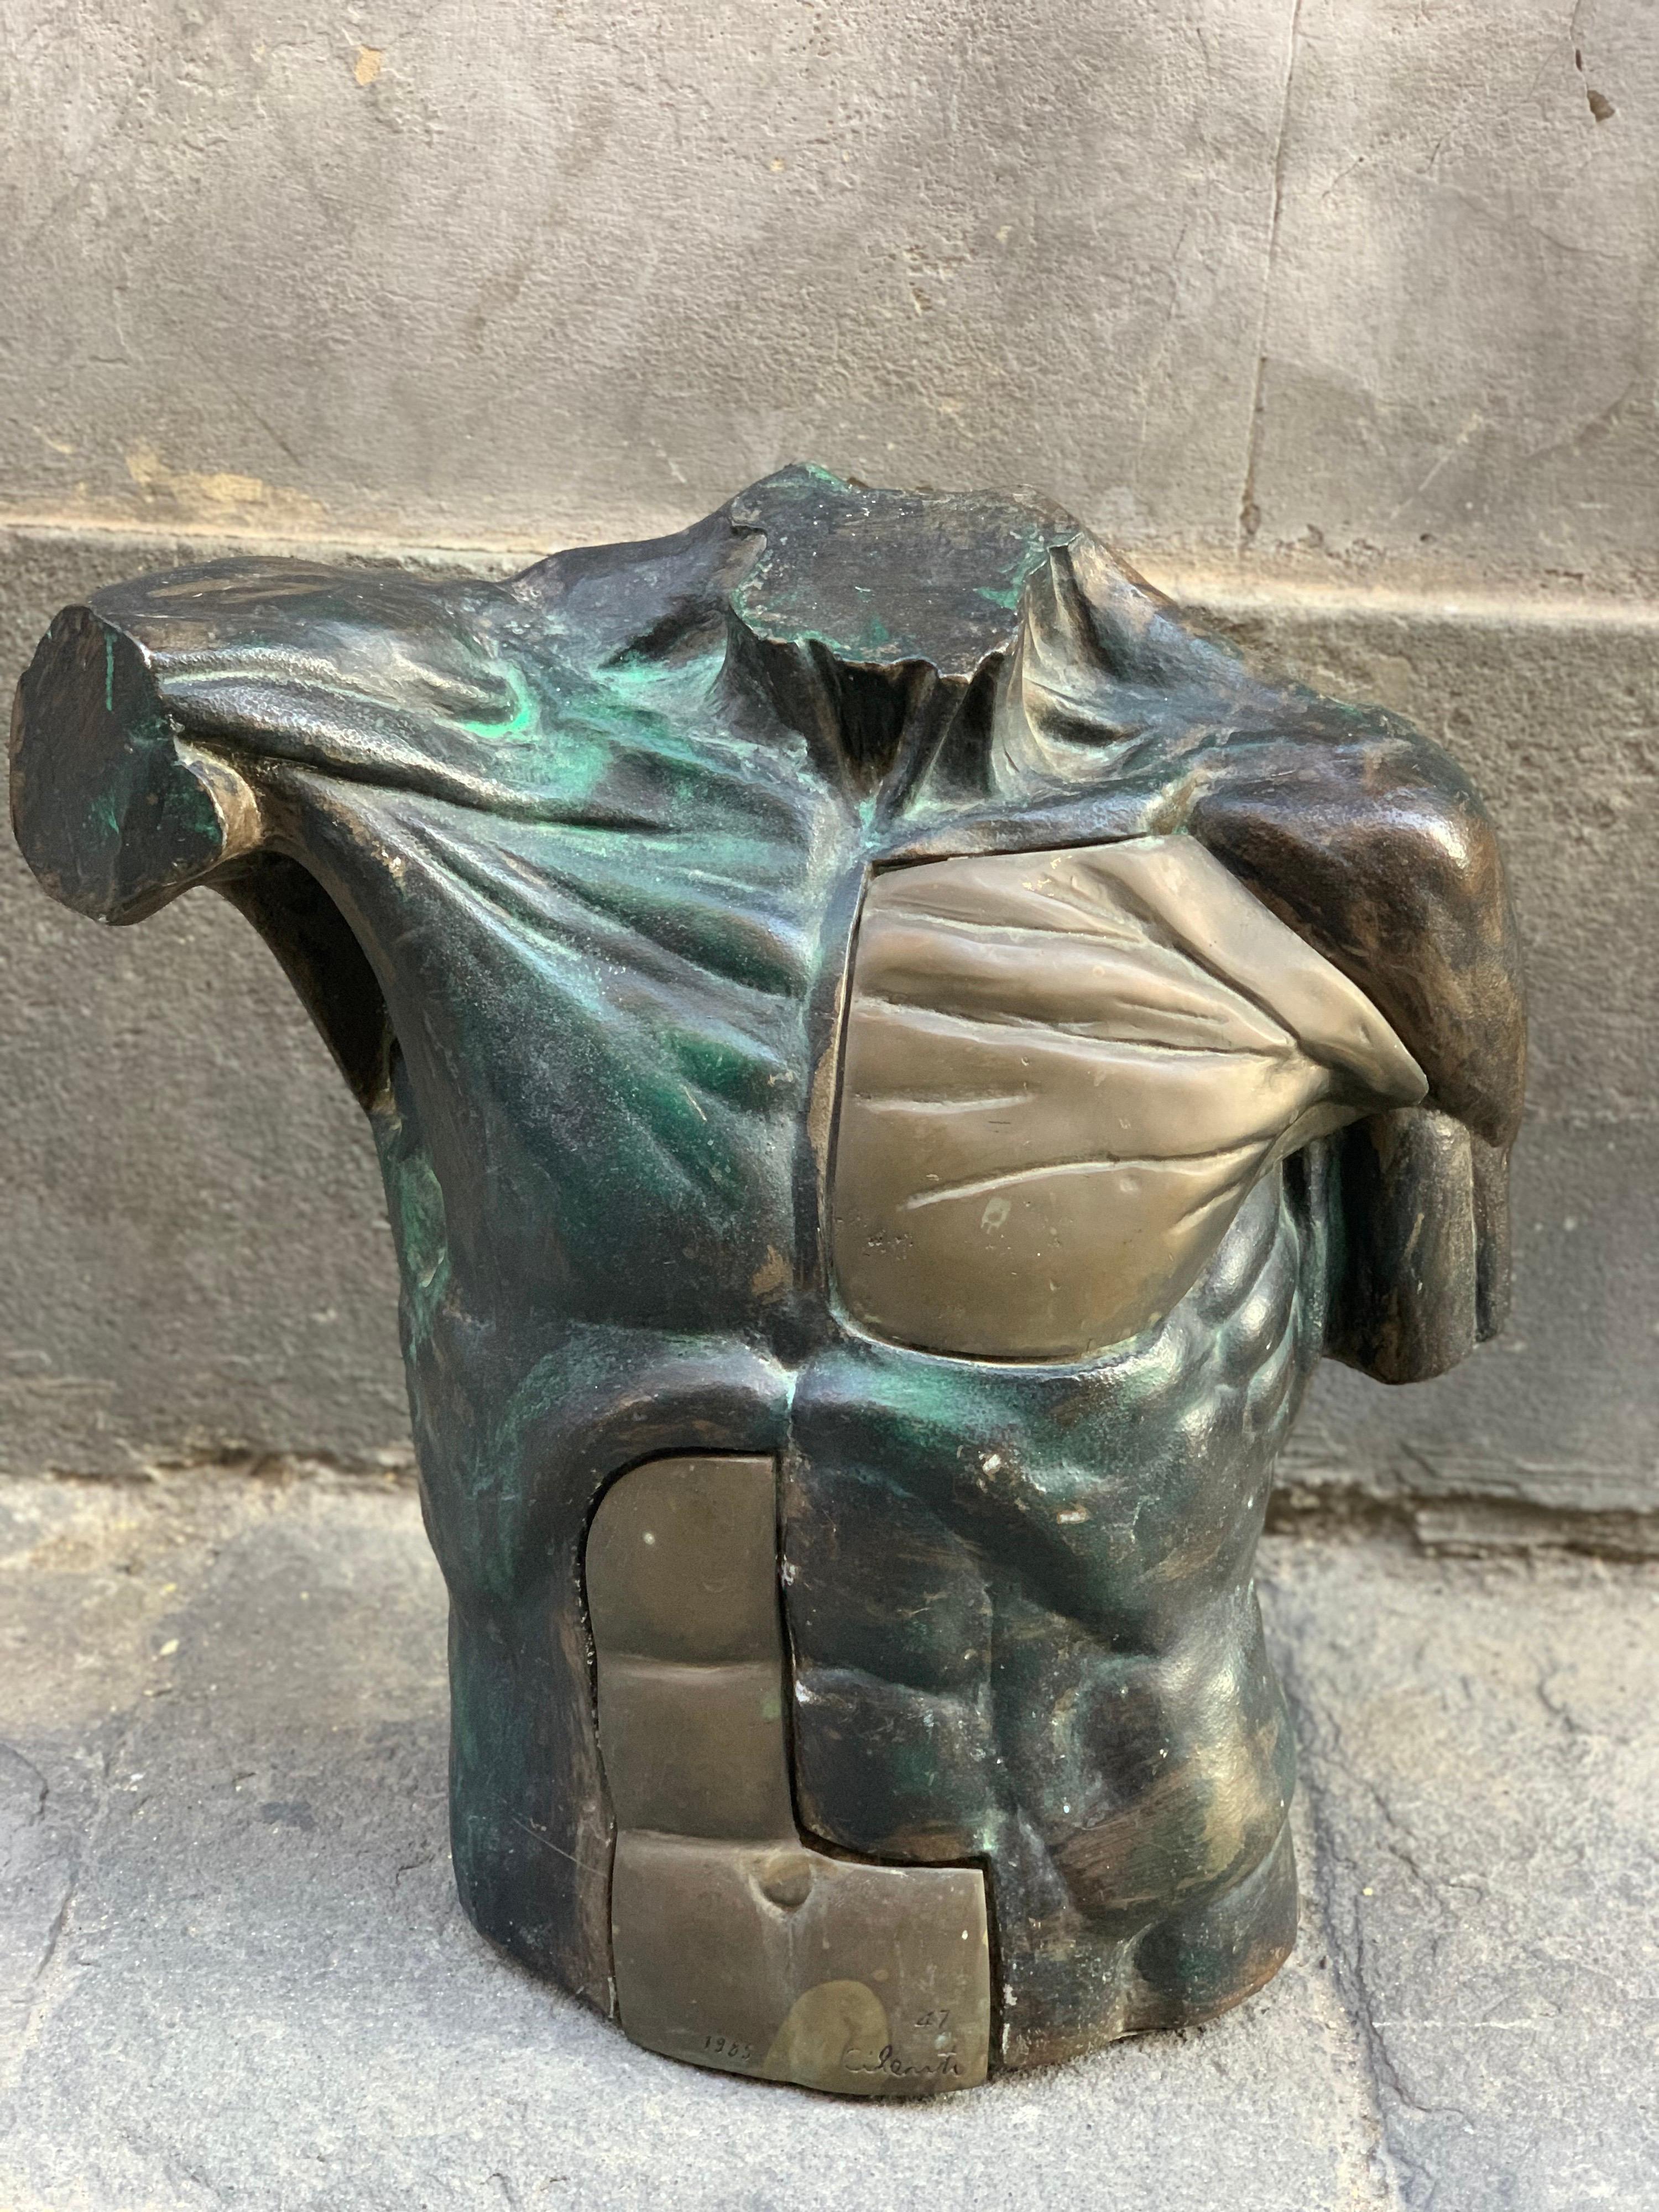 Bronze and Resin Bust of a man, Signed by Cilenti, 1985. 
Part of the the abdomen and pectoral muscles are in bronze, the remaining parts are in dark brown, green, black, and silver painted resin. The sculpture is heavy and powerful and expresses